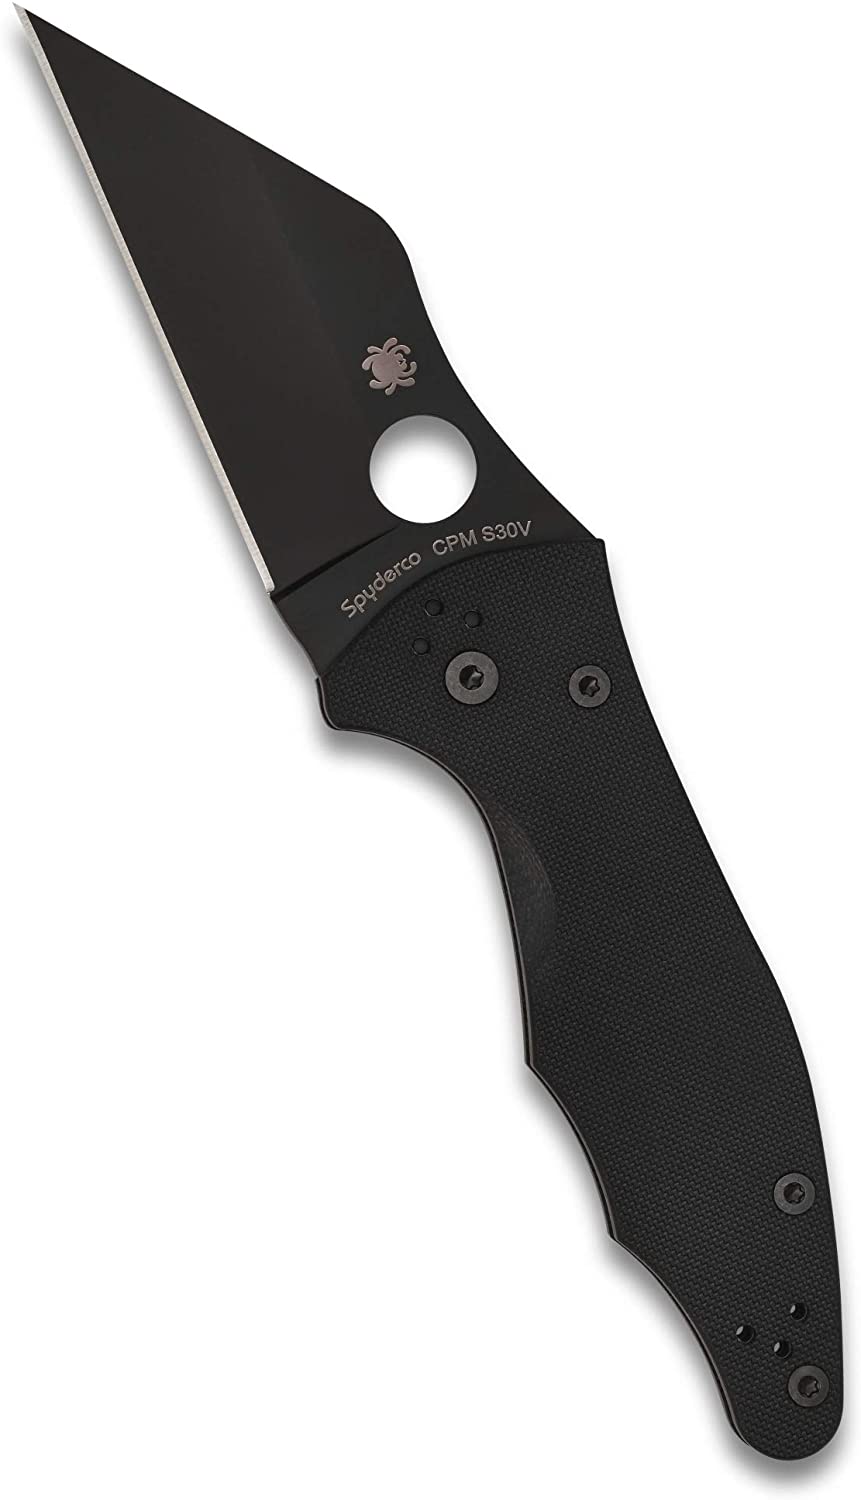 Tactical knife with a black handle and black steel body